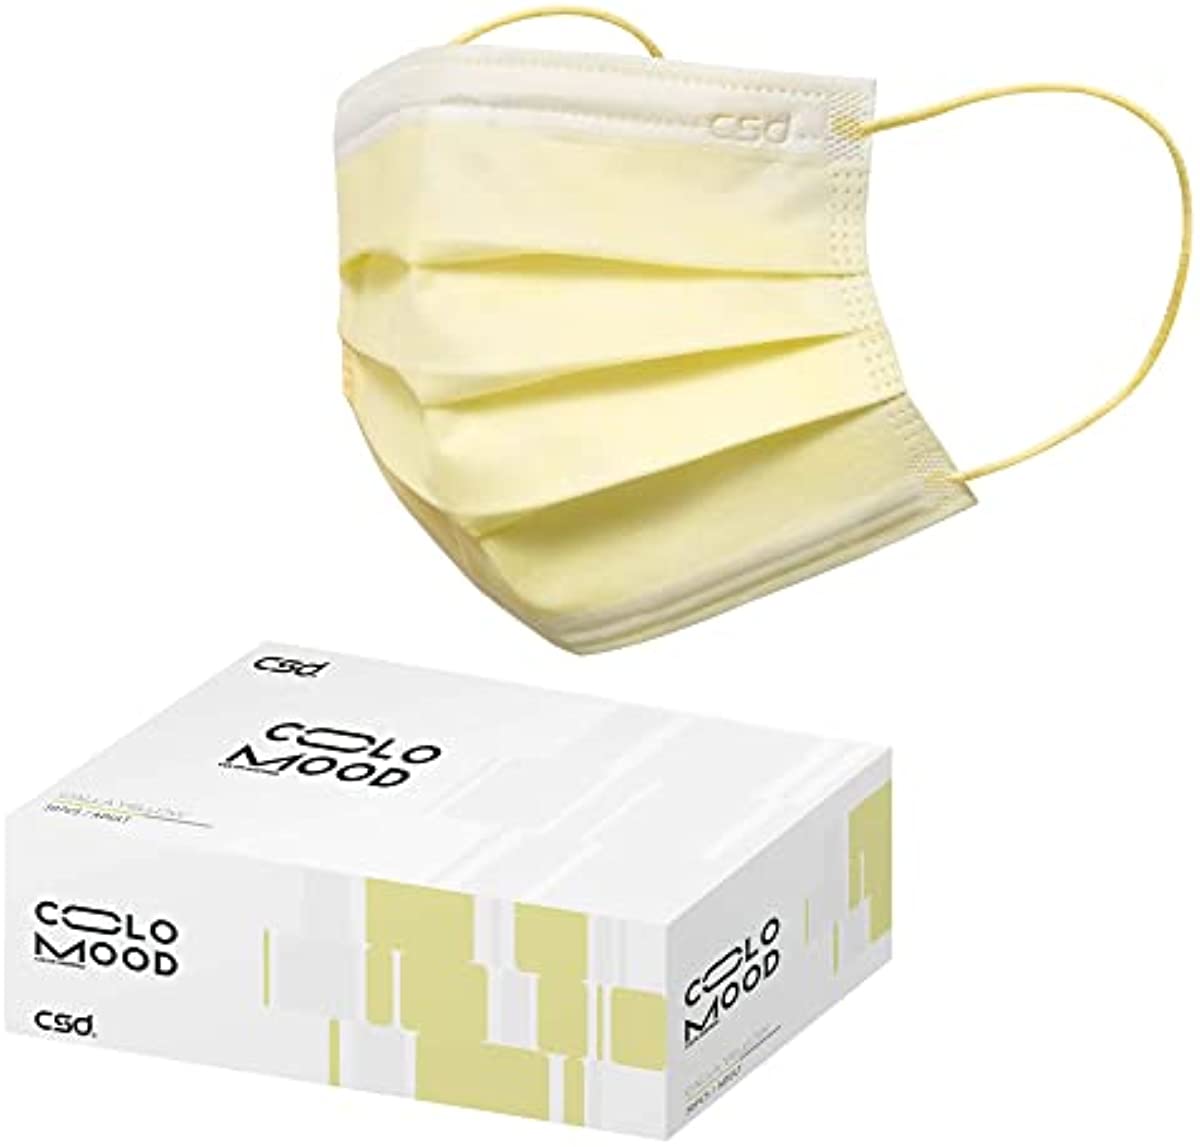 CSD Colo Mood Disposable Face Mask, 3 Ply Filter Protection with Colored Elastic Earloop, Breathable and Fashionable for Adult, Calla Yellow 30 Pcs/Box